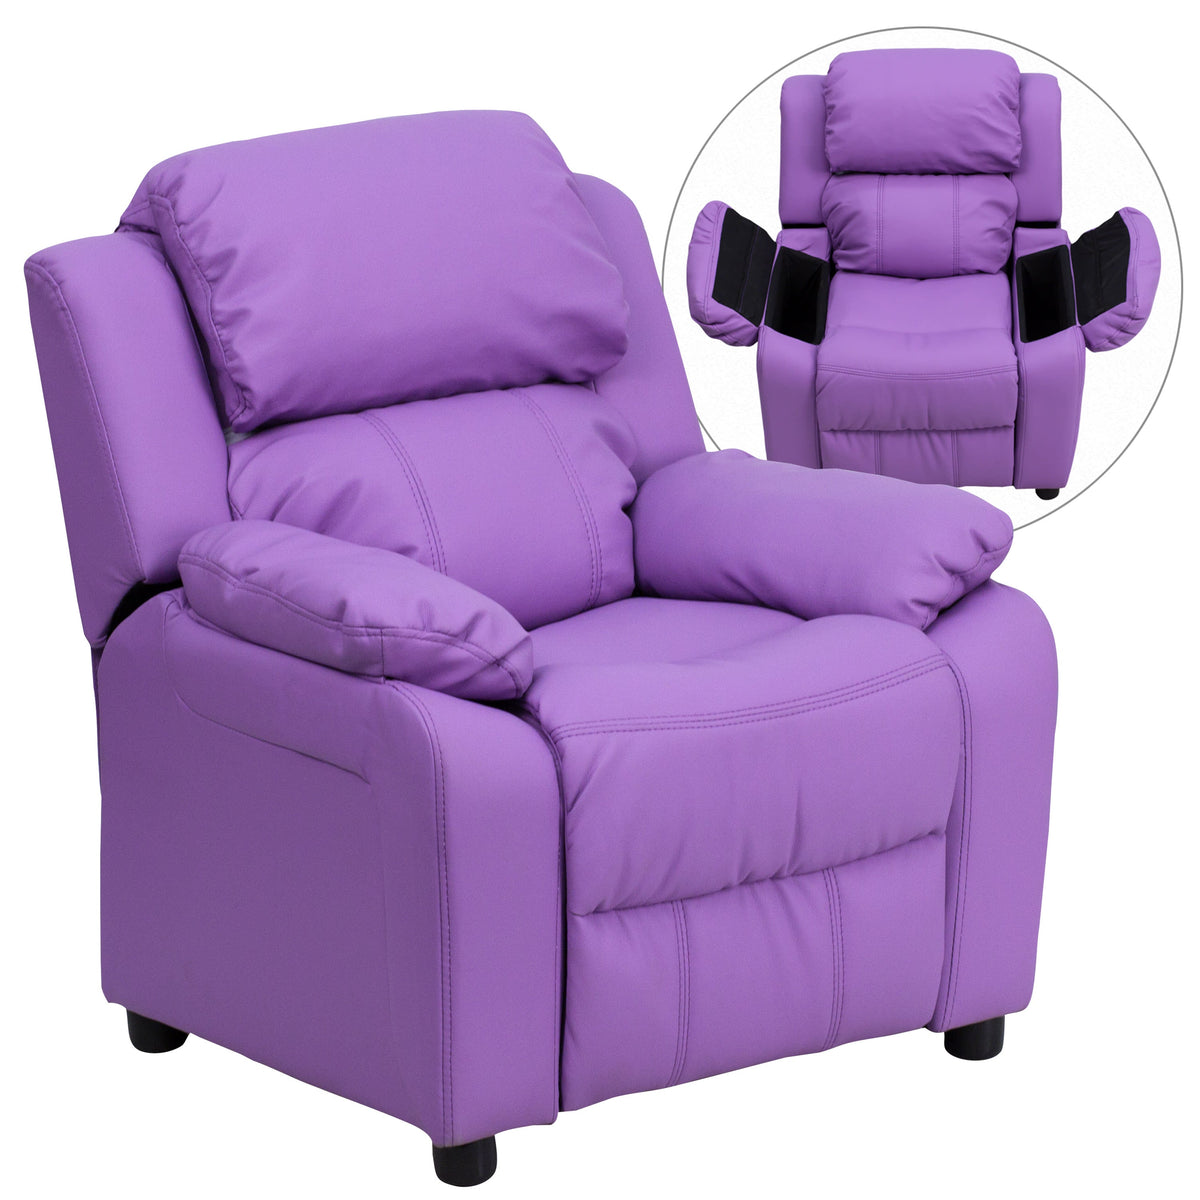 Lavender Vinyl |#| Deluxe Padded Contemporary Lavender Vinyl Kids Recliner with Storage Arms